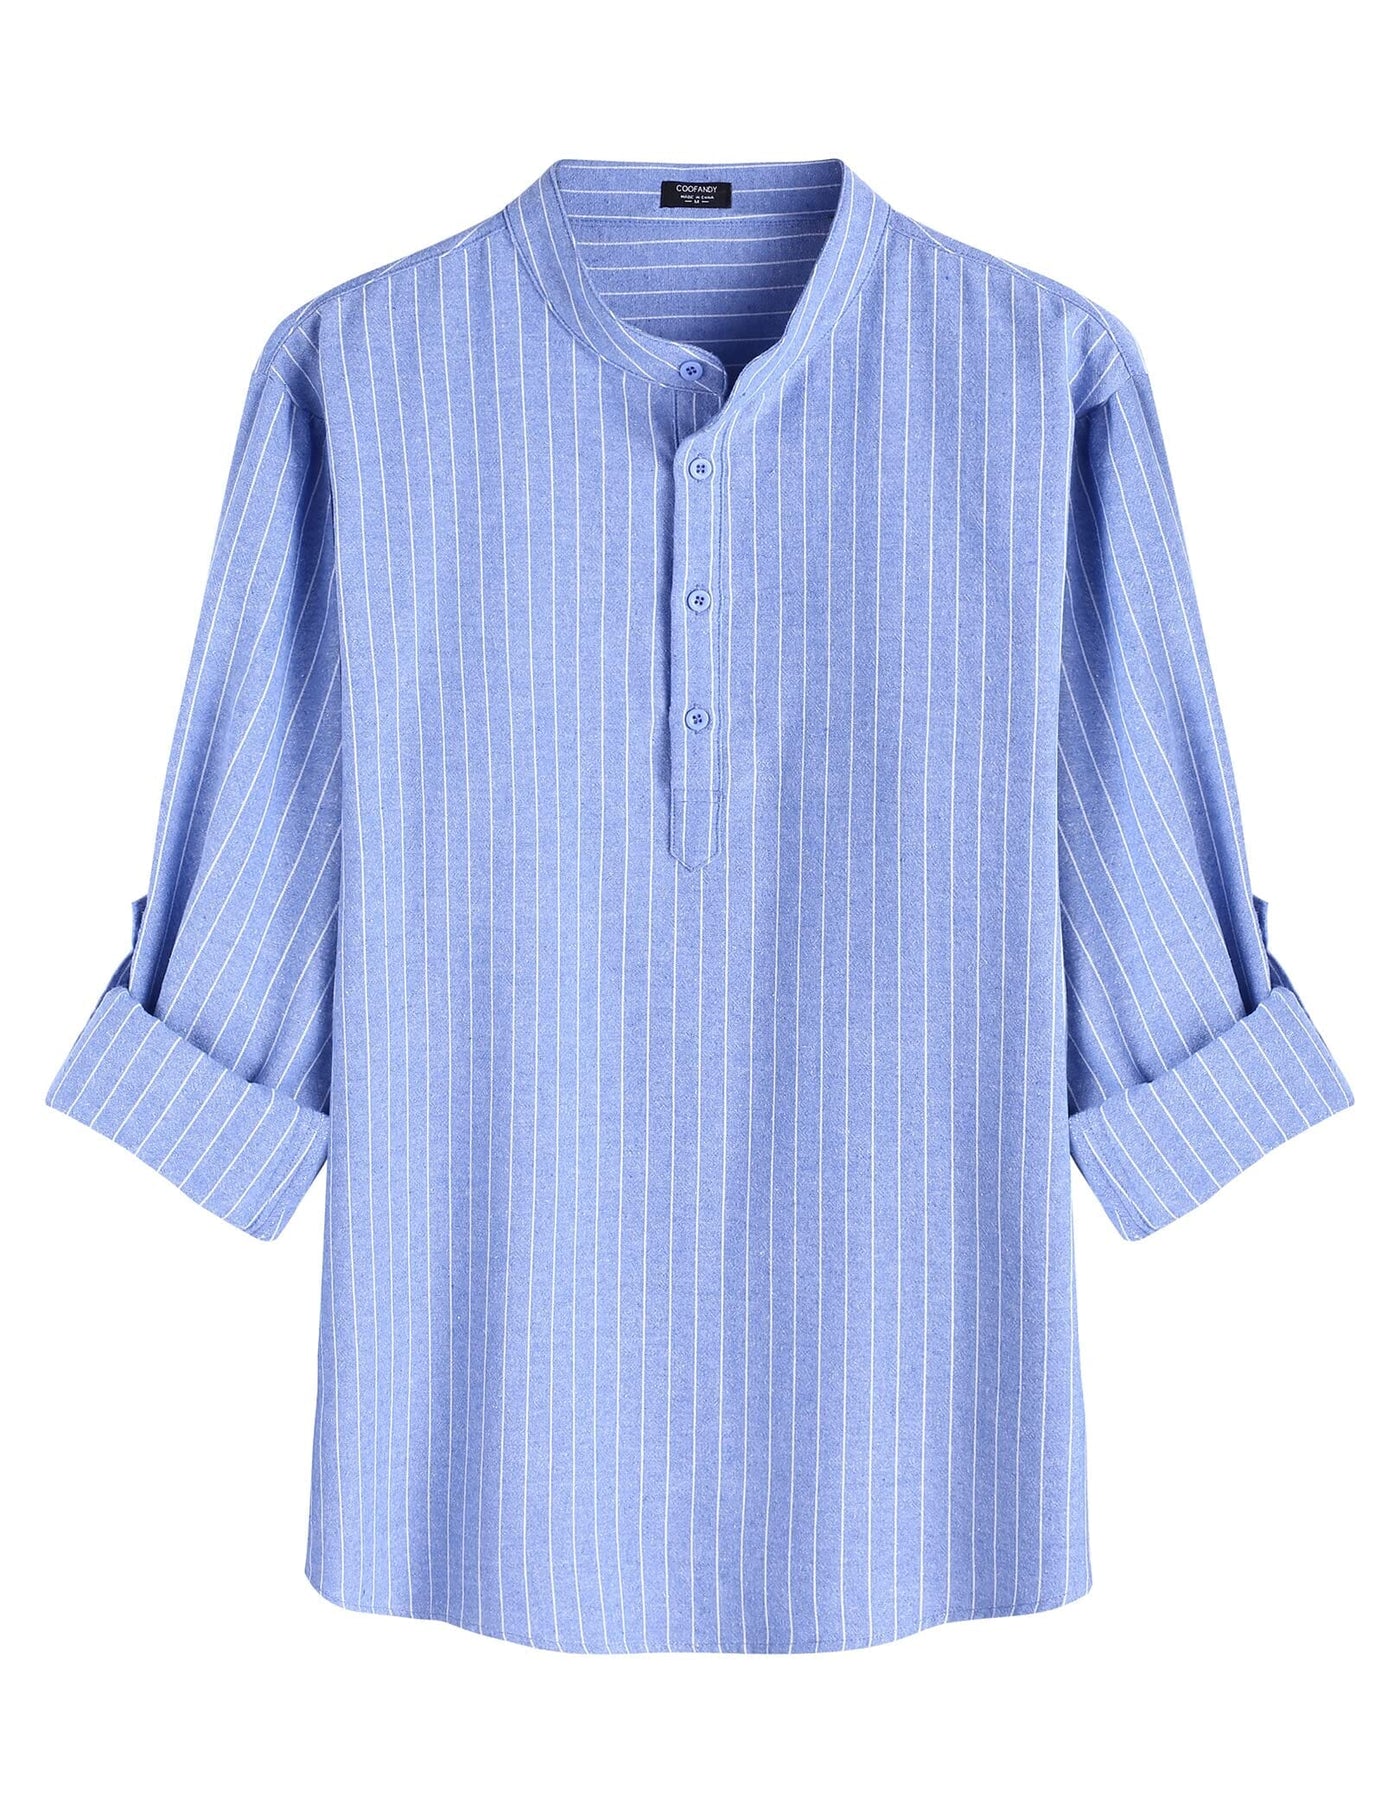 Coofandy Casual Beach Shirts (US Only) Shirts coofandy Blue Striped S 